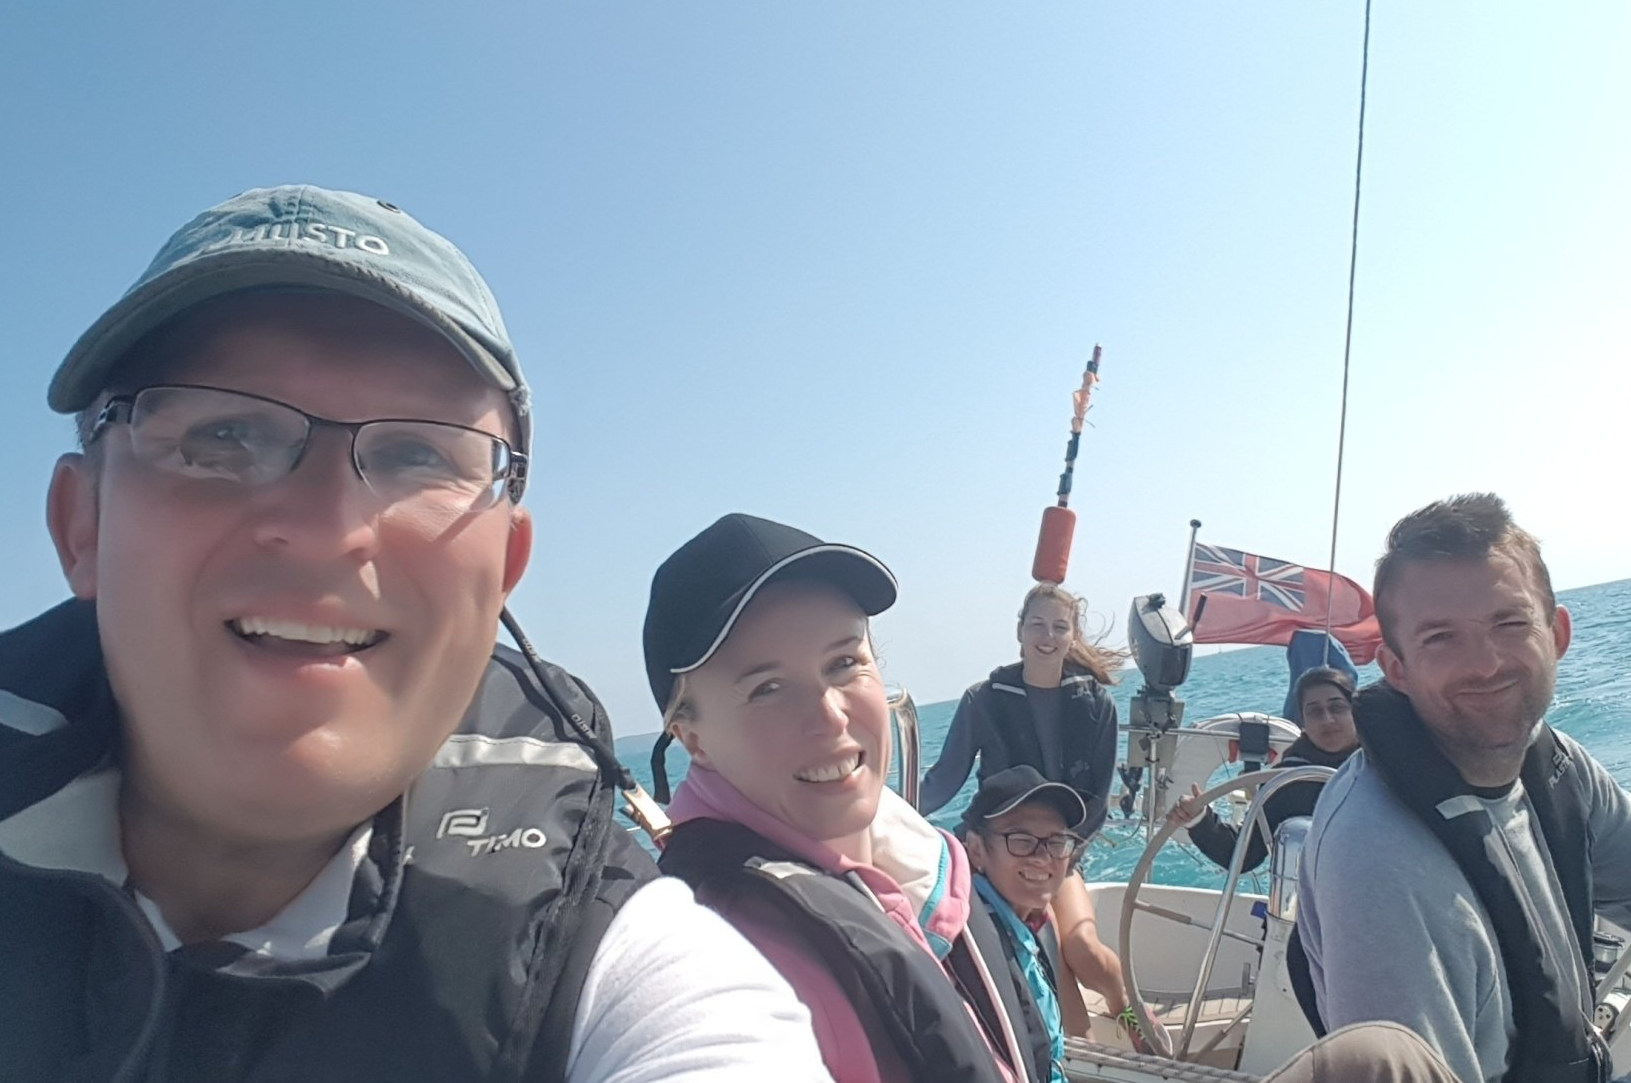 A selfie picture of a smiling crew on an underway yacht. The crew is a mixture of sighted and VI sailors. The horizon in the background is at an angle, showing the yacht is under sail.